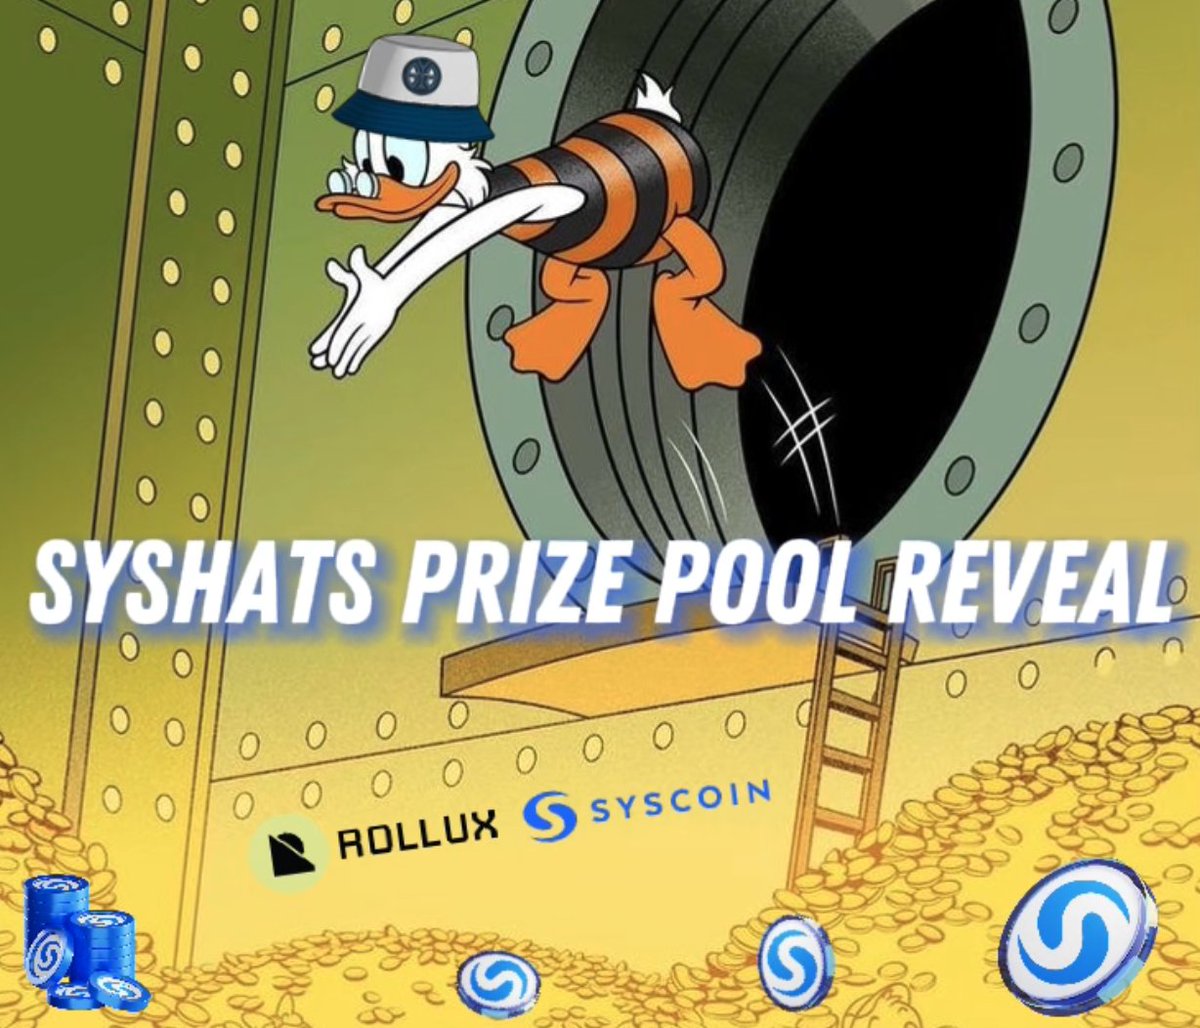 💸 $SYS PRIZE POOL REVEAL 💸

The awaited moment has arrived! Time to get some $SYS! 🔥

SysHats got to 1,036 minted #NFT hats until the limit date, bringing us to Tier 1 Prize Pool, with 25,000 $SYS in Prizes! 🤑

NOW LET'S GET TO THE AWARDED HATS! 🧢🤩

🏆 MEGA winner: SysHat